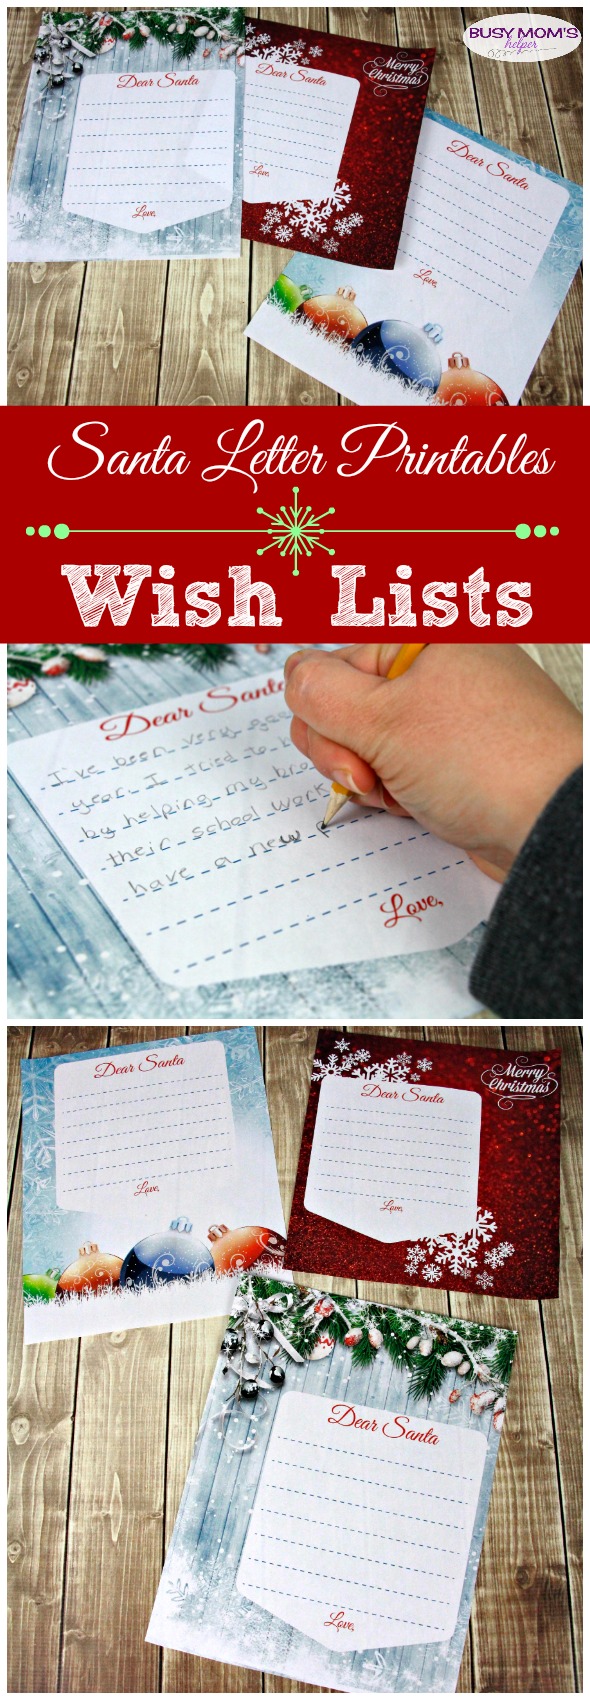 Santa Letter Printable Wish List / great free printable wish lists for the holidays! Three cute holiday designs for a letter to Santa #christmas #holidays #santa #wishlist #christmaslist #freeprintable #christmasprintable #santaletter #printablewishlist